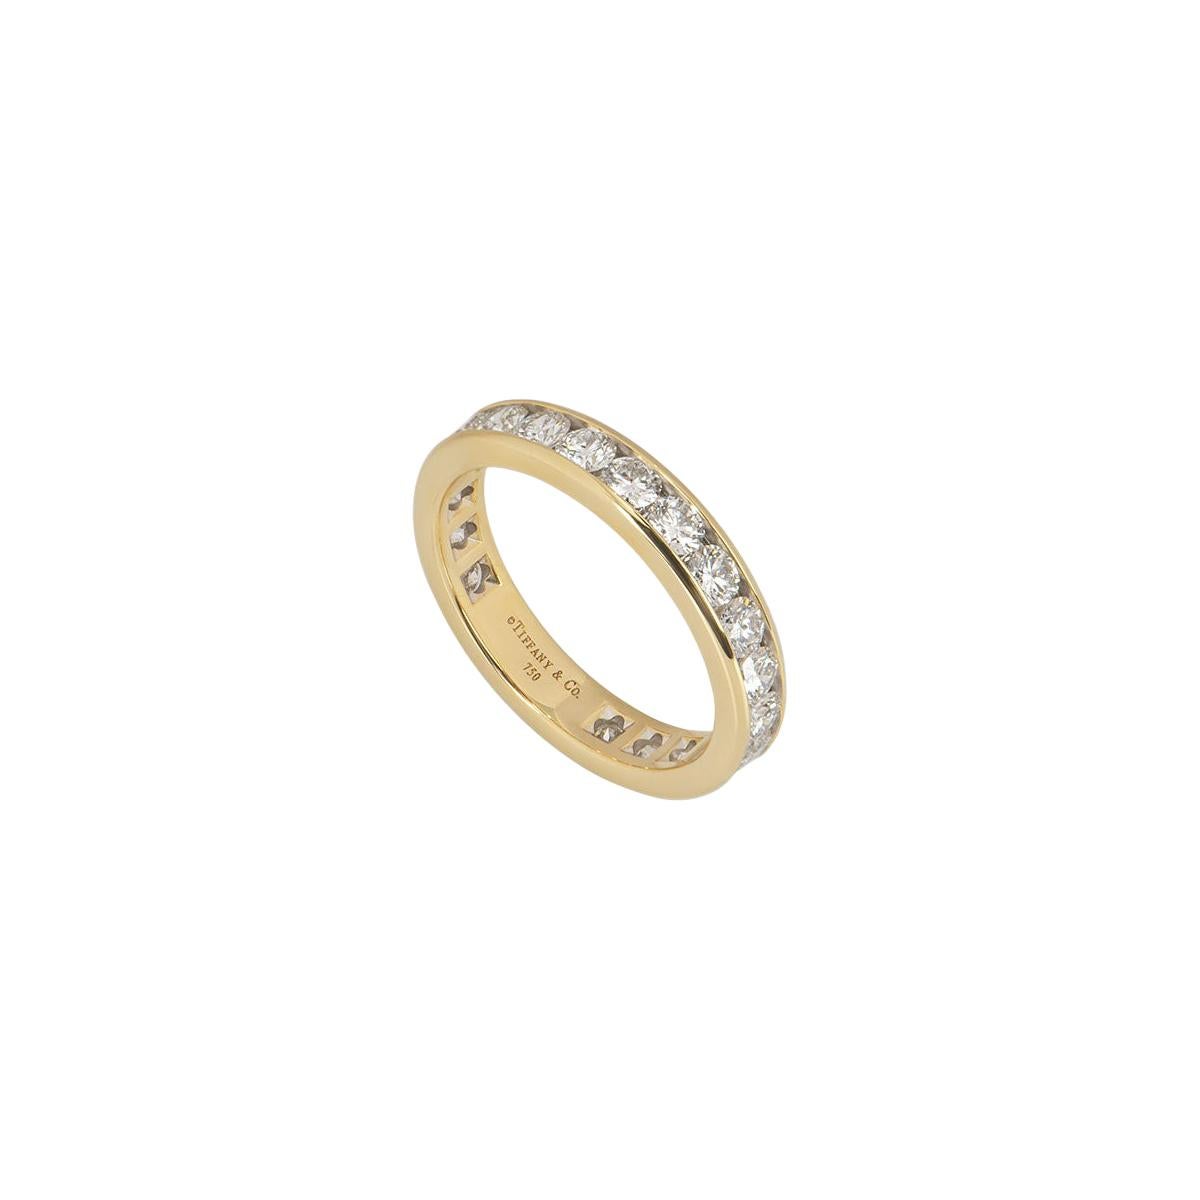 A stunning 18k yellow gold diamond ring by Tiffany & Co. from the Diamond Wedding Band collection. The ring is channel set with 22 iconic round brilliant cut diamonds, with a total weight of 1.89ct. The ring has a width of 3.9mm and is a size UK O½,